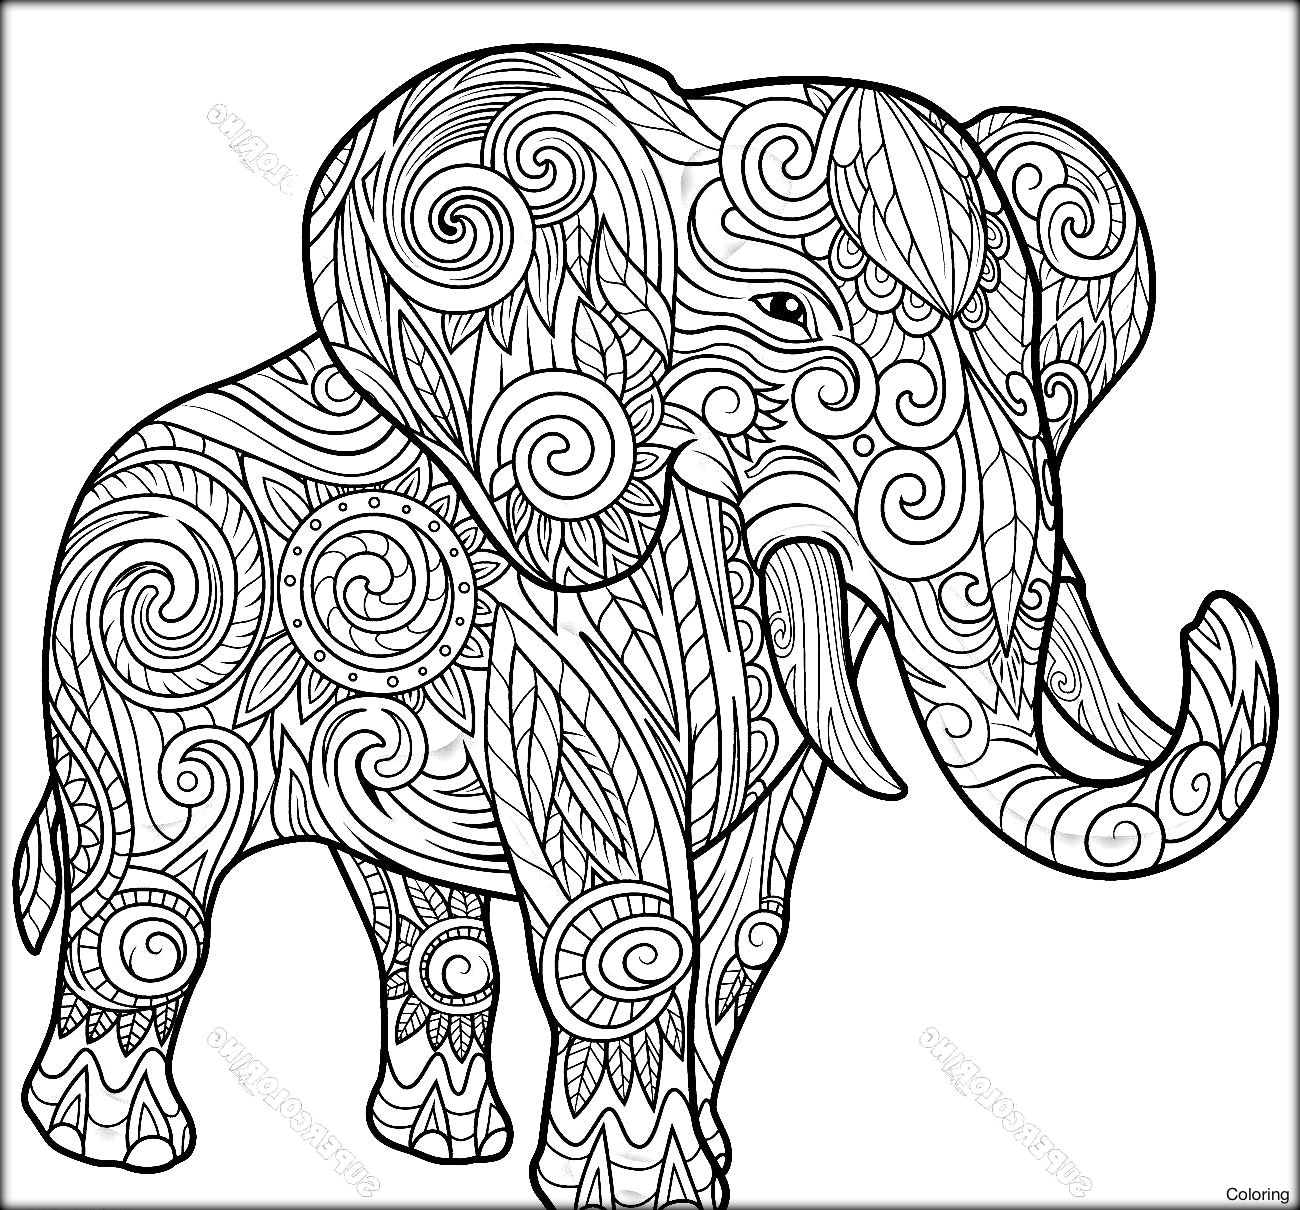 Elephant Mandala Coloring Pages at GetDrawings Free download